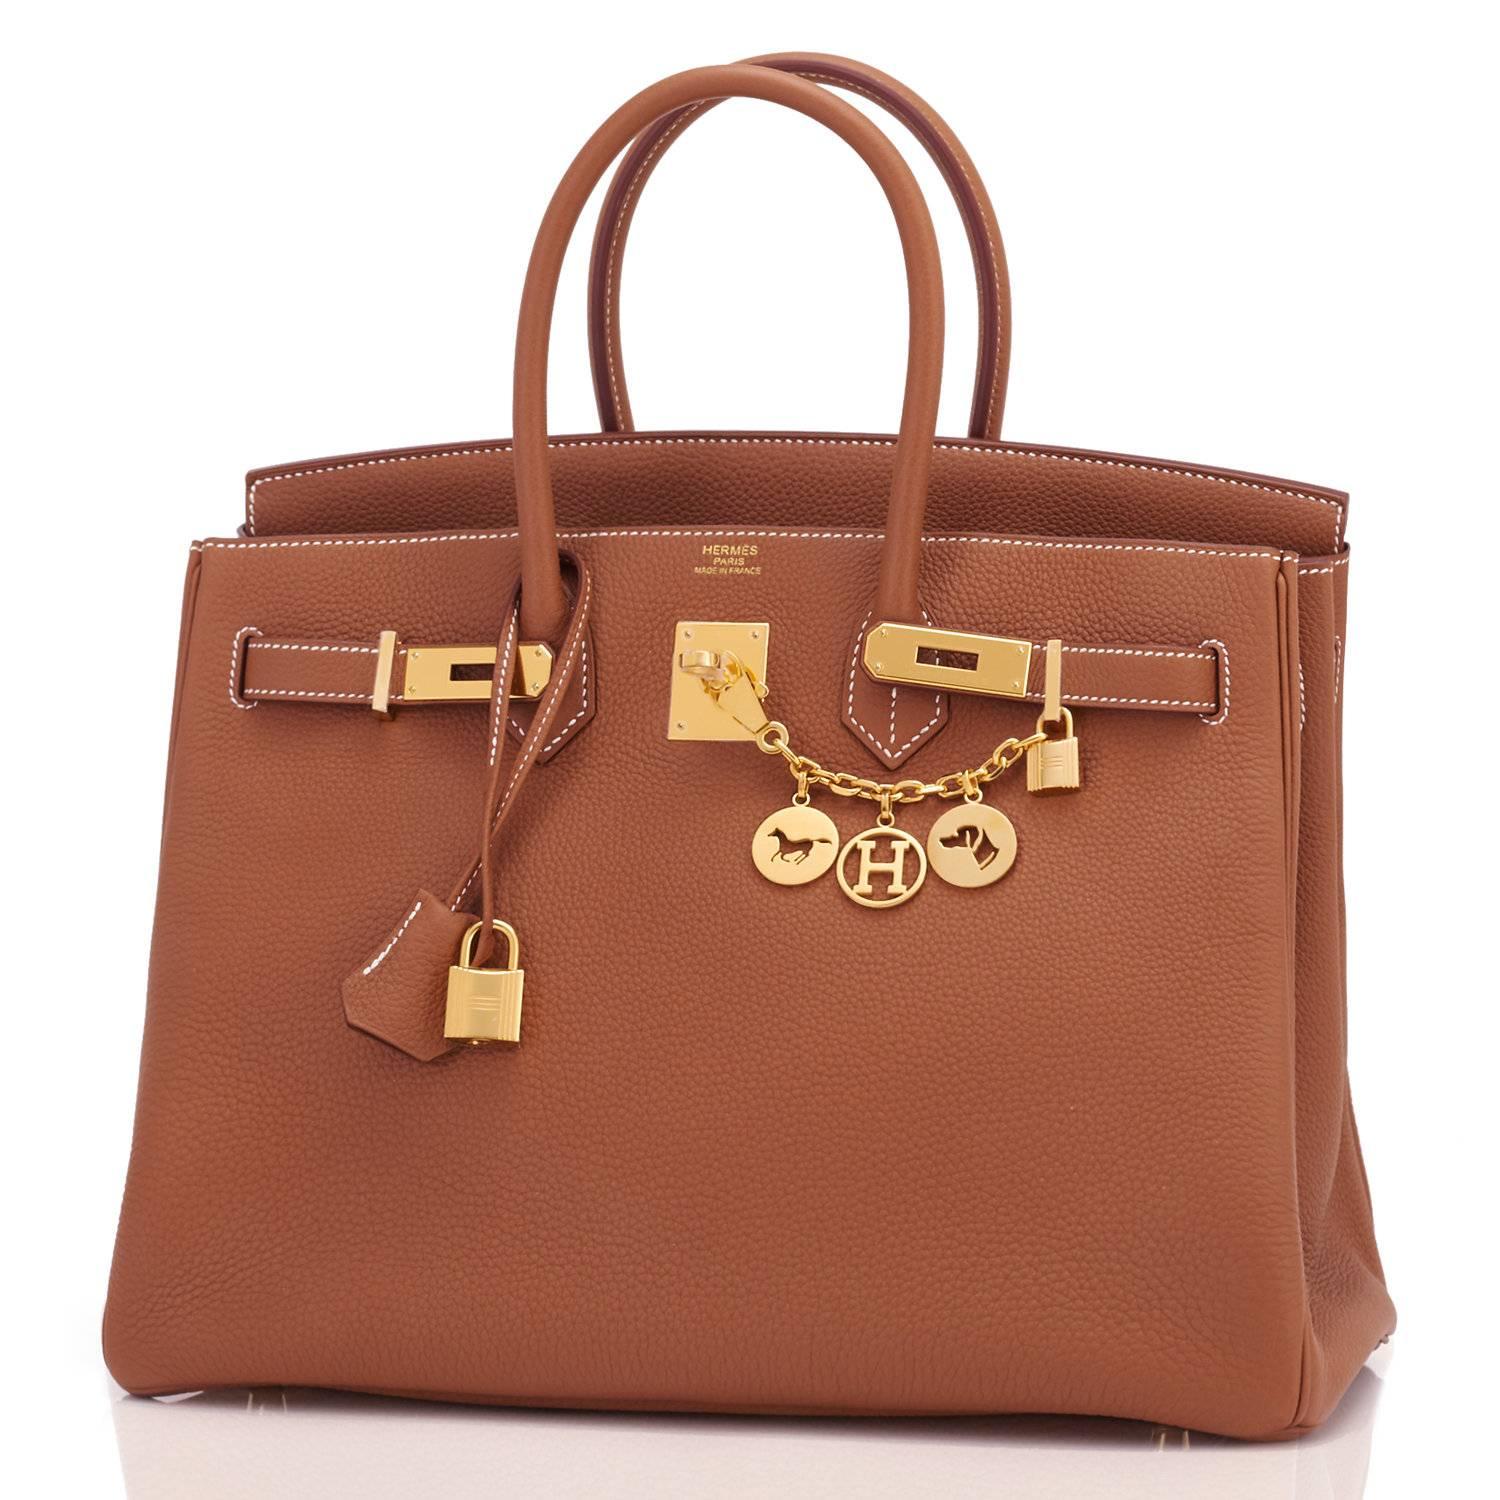 Hermes Gold Togo Camel Tan 35cm Birkin Gold Hardware
New or Never Worn. Pristine Condition (with plastic on hardware). 
Perfect gift! Comes with lock, keys, clochette, sleeper, raincoat, and Hermes box.
Gold is a gorgeous camel tan, perhaps the most